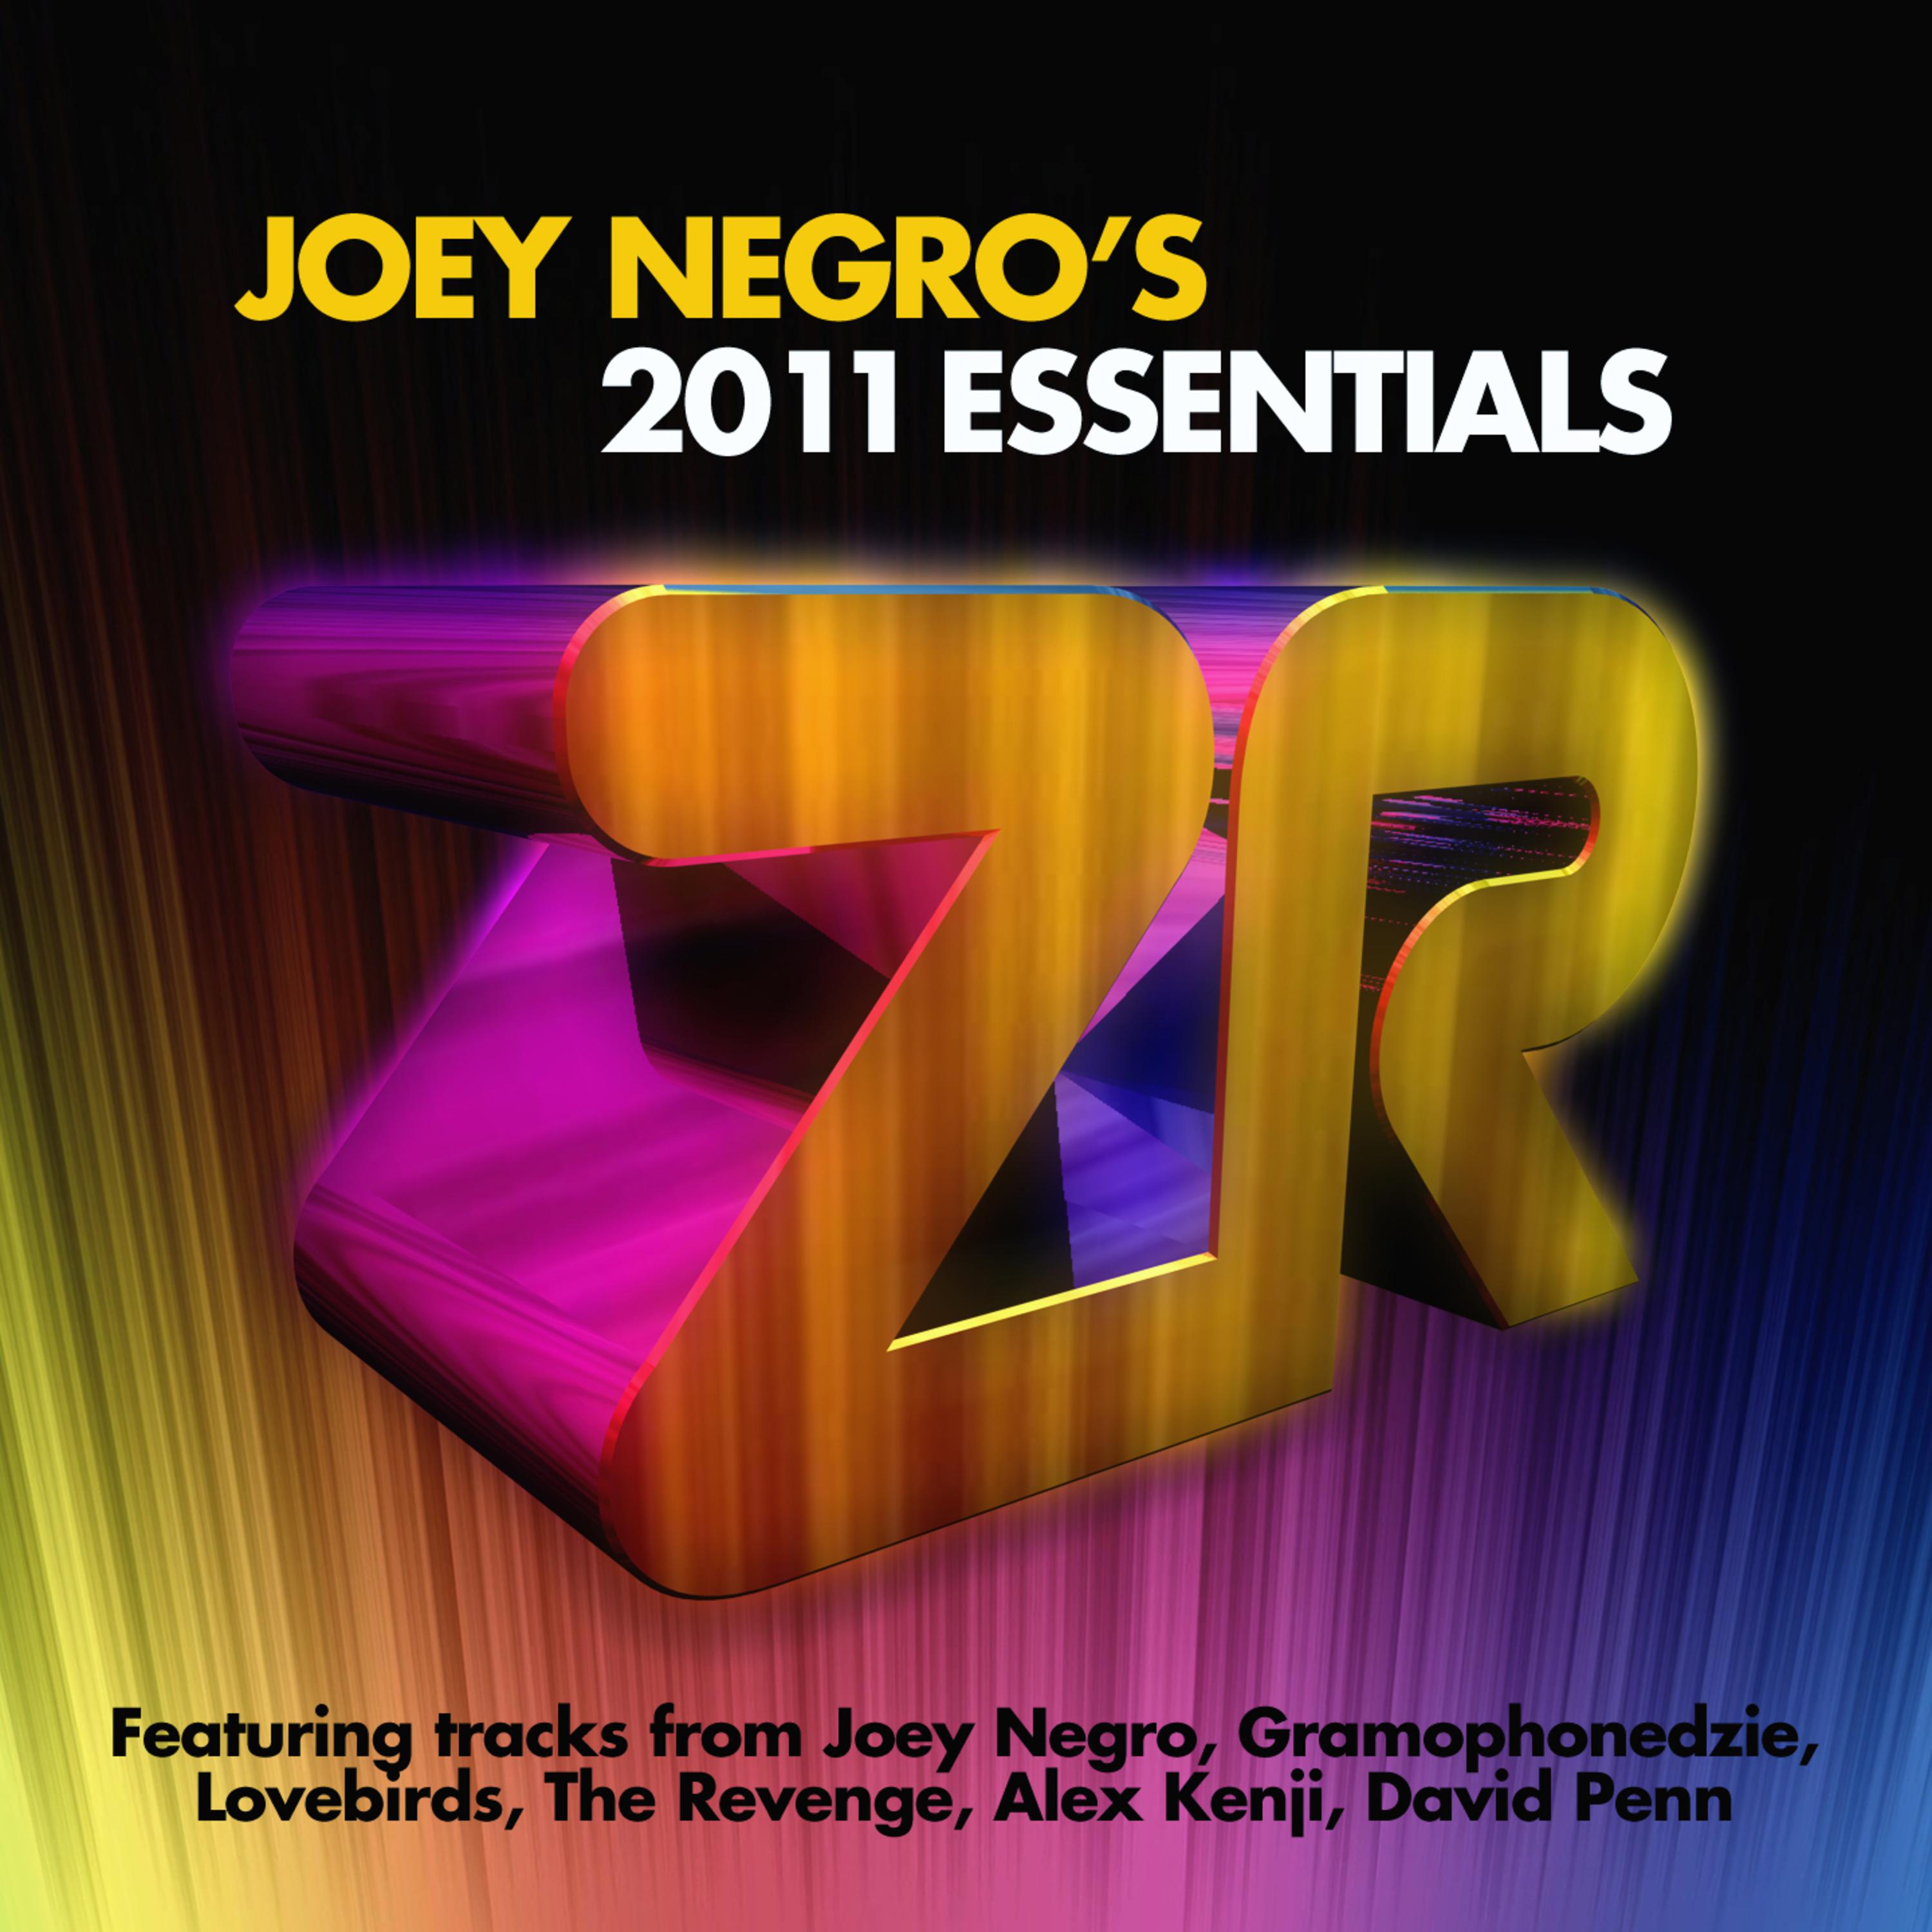 All Over the World (Joey Negro Club Mix)